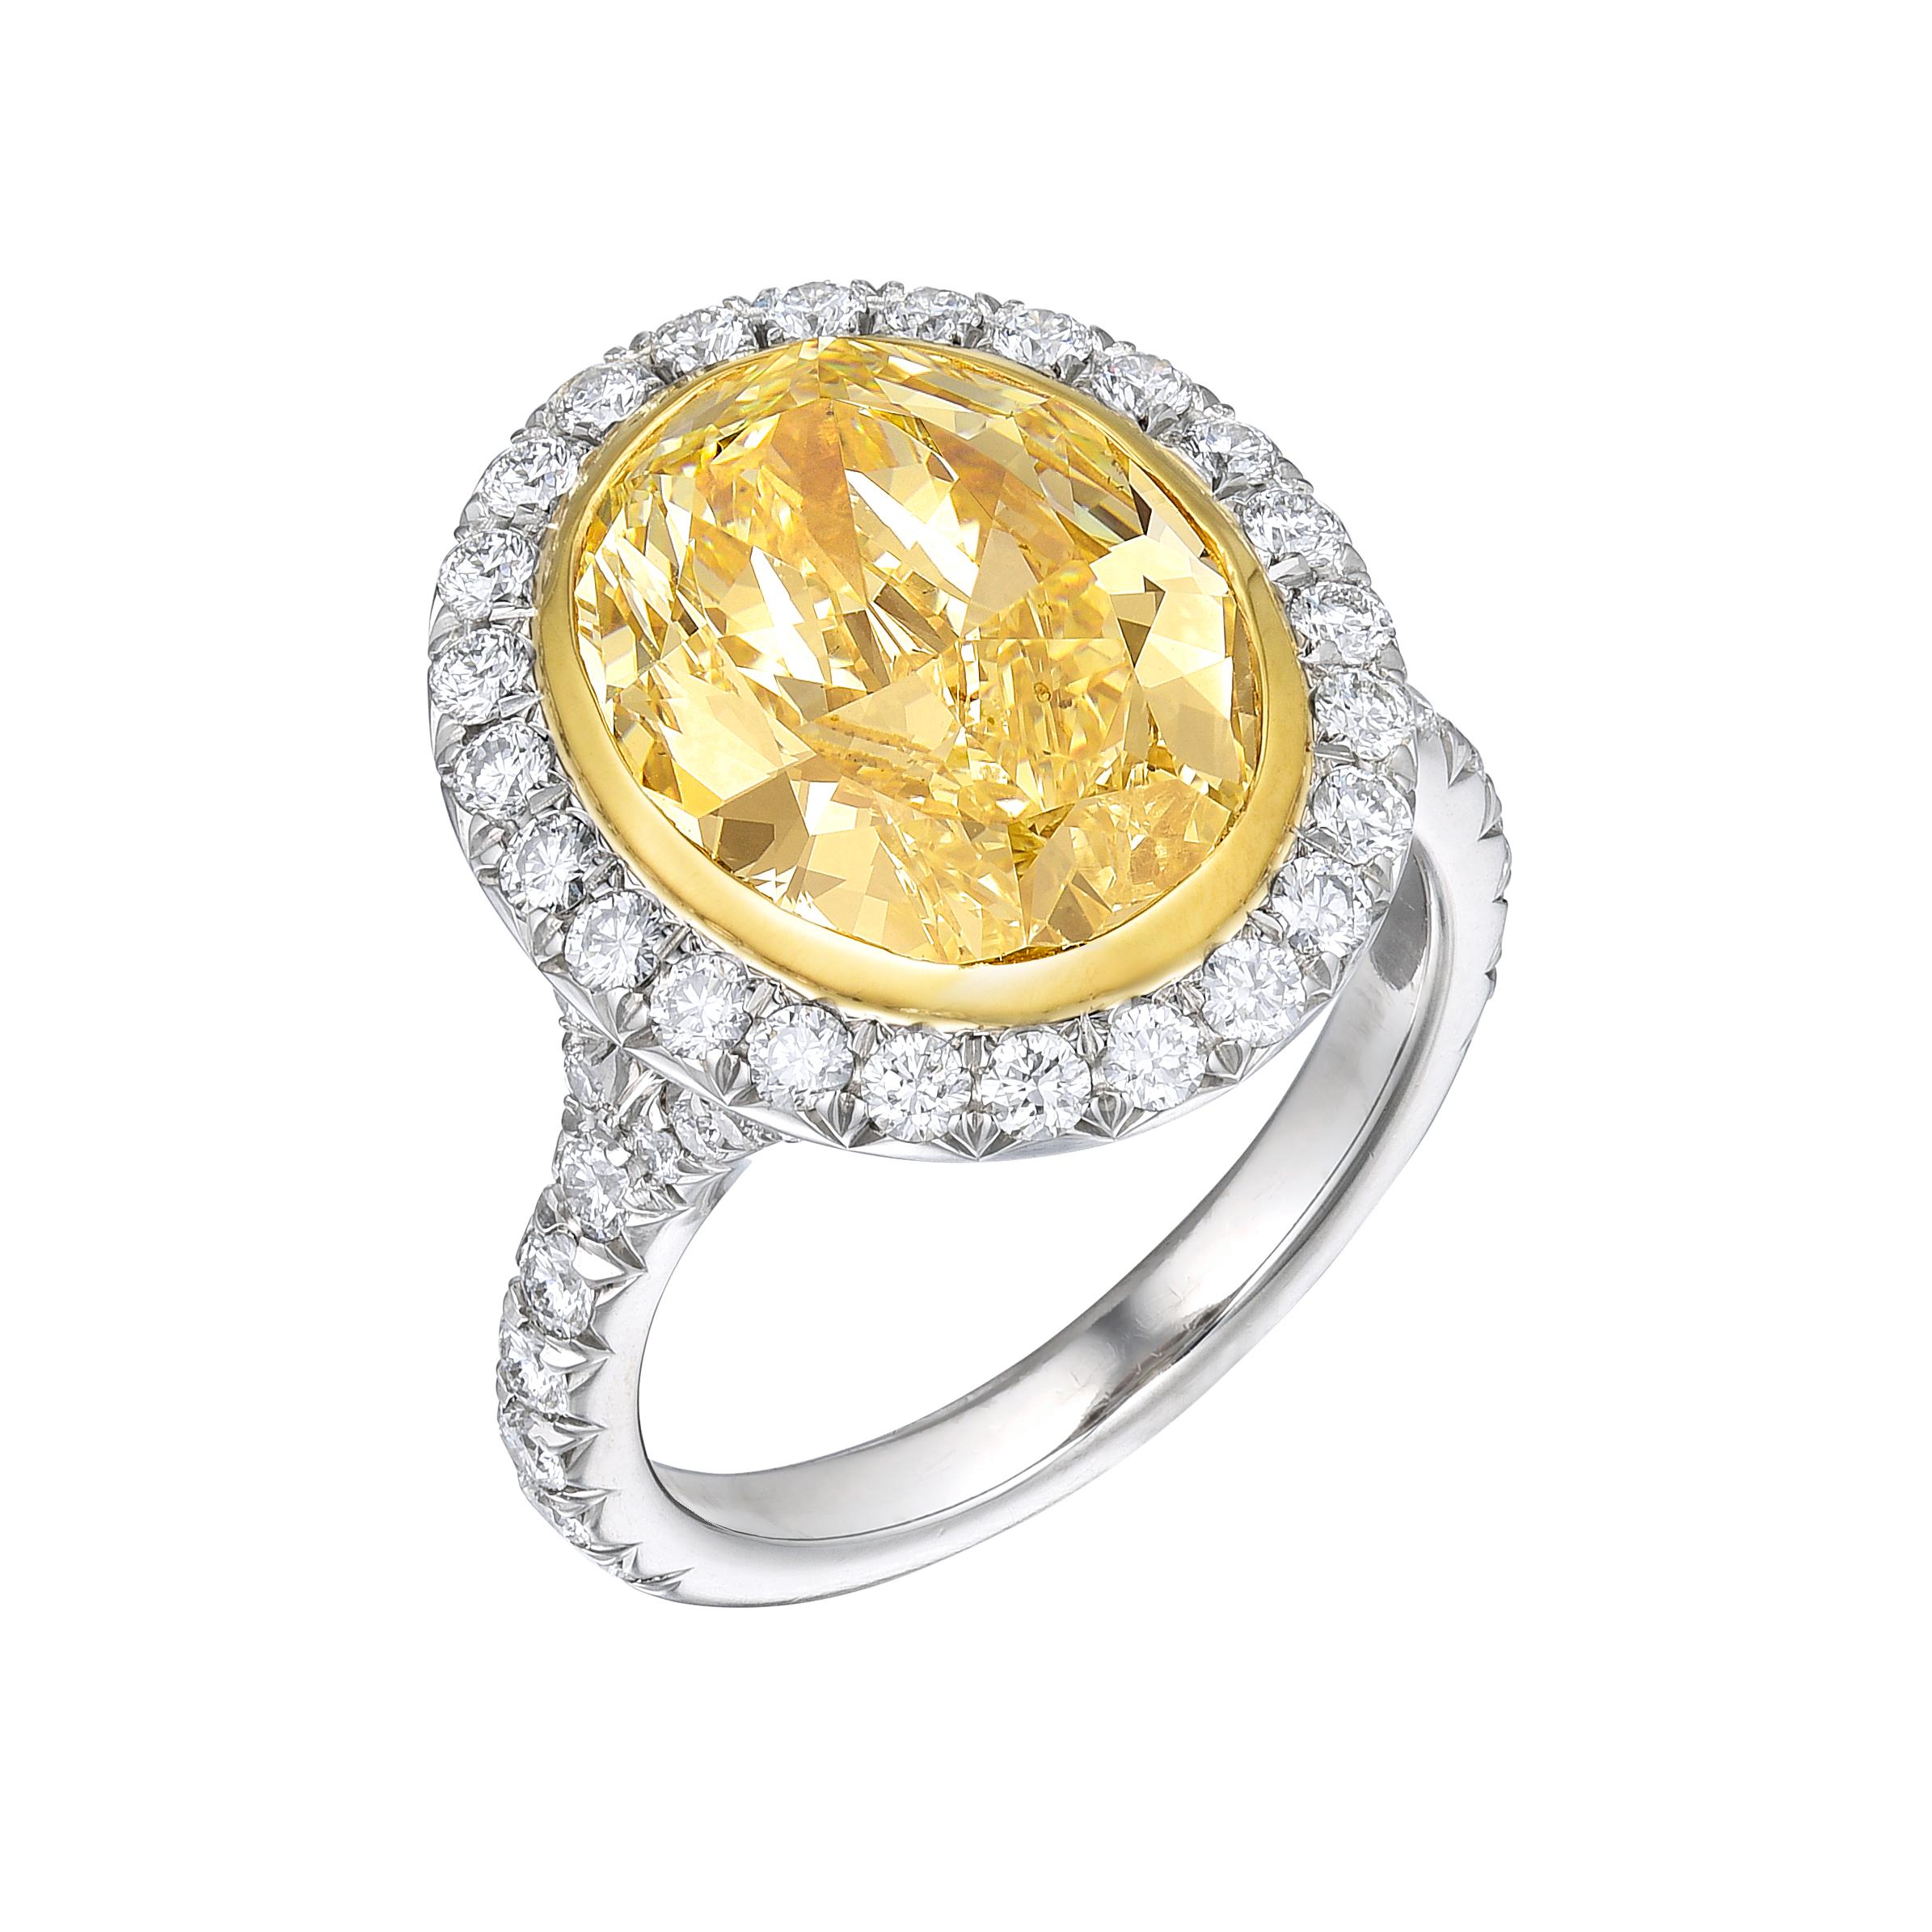 Diamond Platinum Fancy Yellow Ring, with GIA certificate no.2165961005, 5.12ct Fancy Yellow VS2 Oval cut natural diamond, 13 x 10mm. Side stones: 1.10ct. Brilliant Round: F-G VS2-SI1, set in french micro-pave style. Total carat weight: 6.22ct.